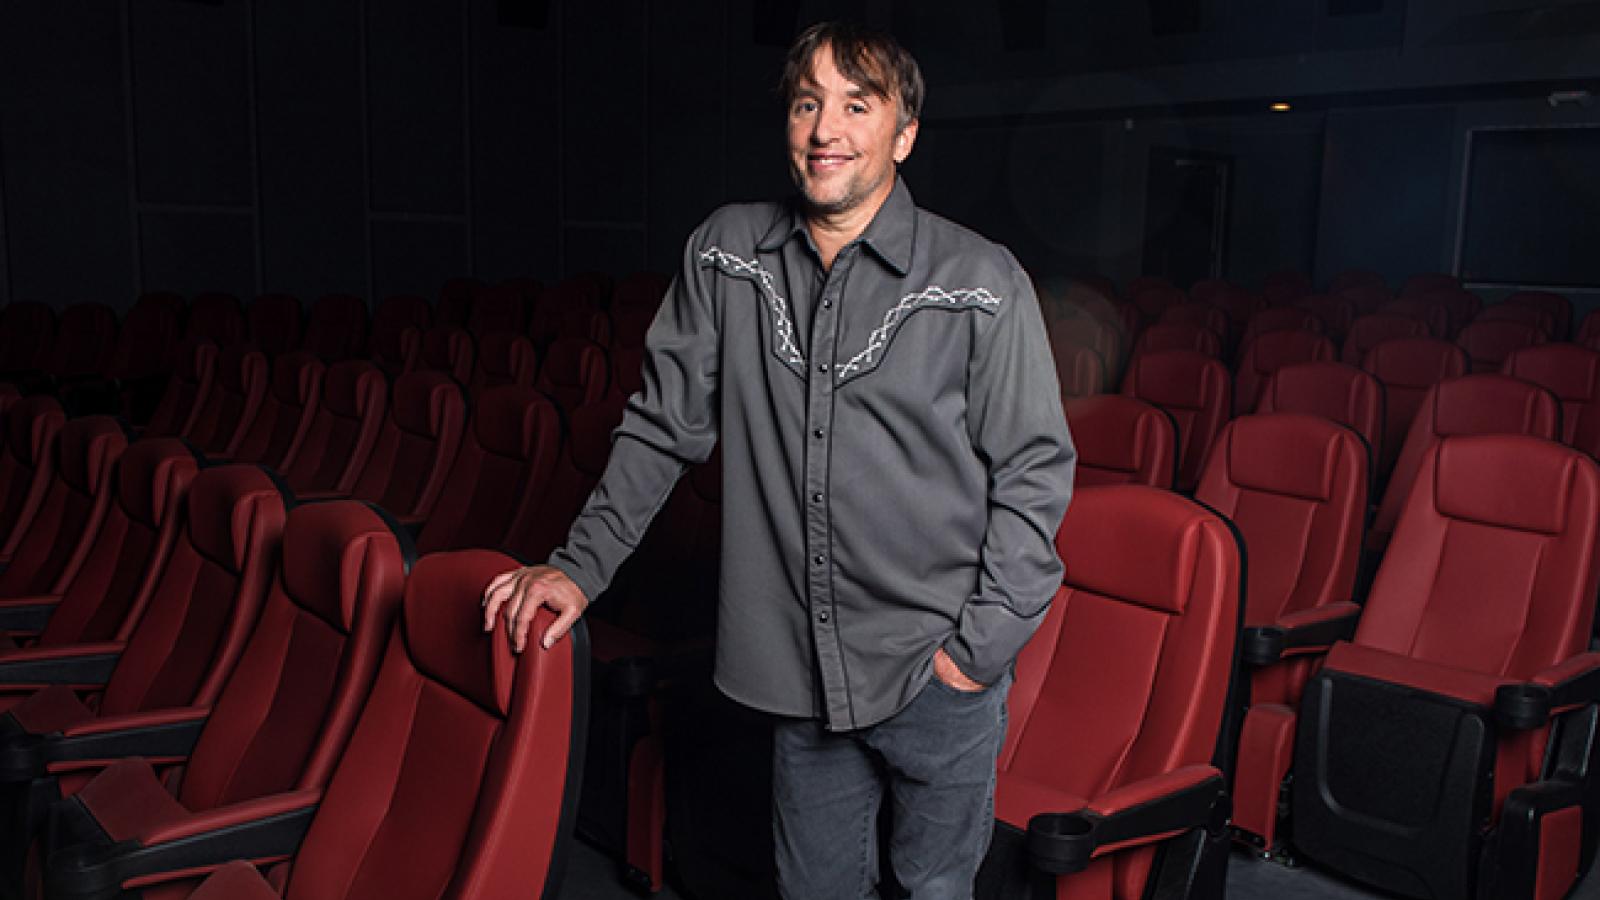 Man standing while holding onto red theater seats